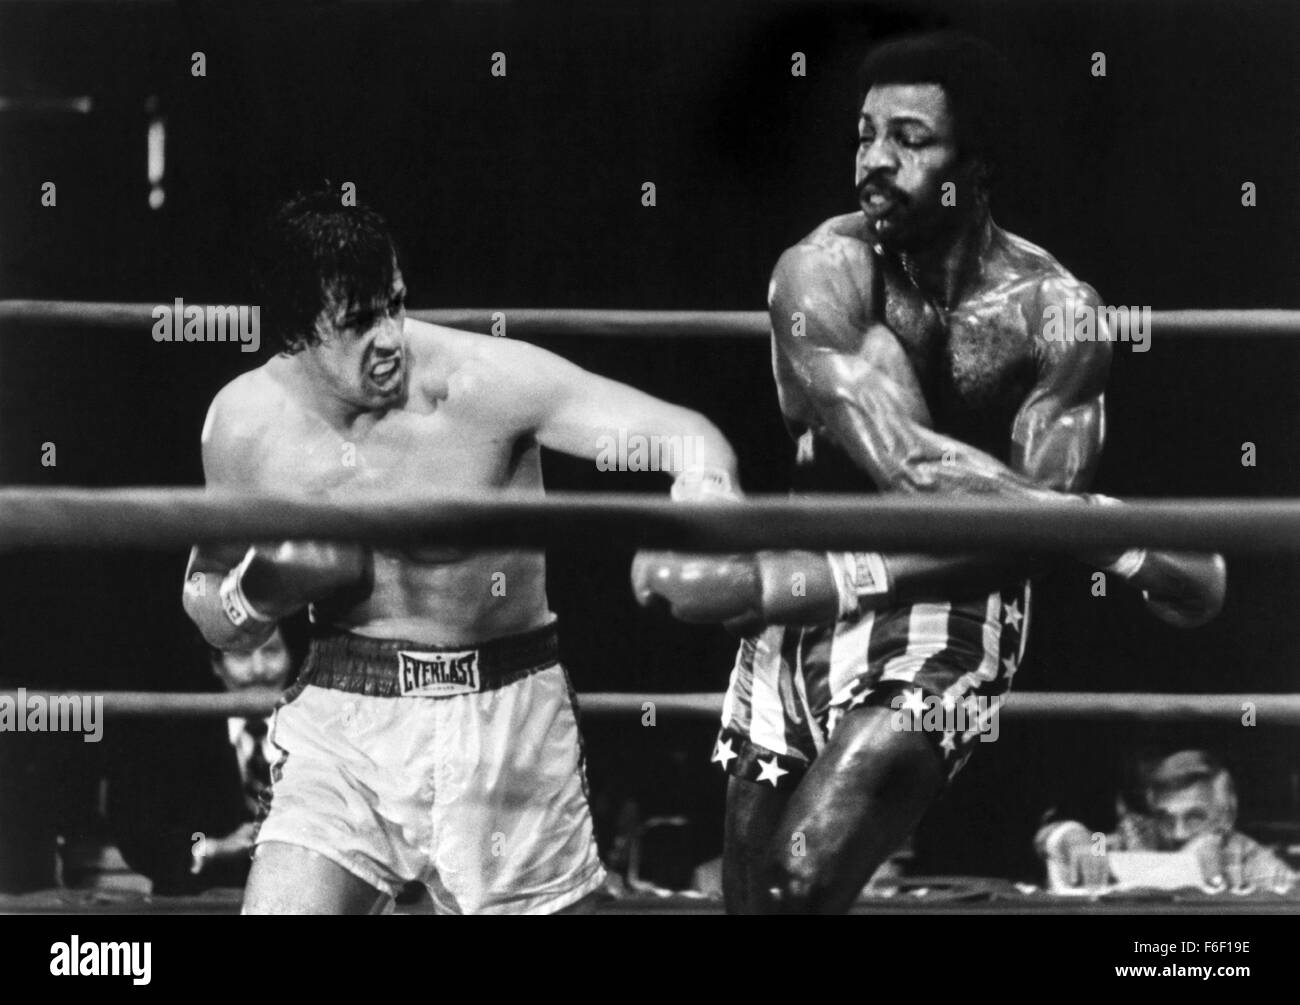 Film Title:  ROCKY.  DIRECTOR John G. Avildsen.  STUDIO:  United Artists.  PLOT:  The action-packed, crowd-pleasing story, shot mostly on location, tells of the rise of a small-time, underdog Philadelphia boxer, Rocky Balboa (Sylvester Stallone) against insurmountable odds in a big-time bout with Apollo Creed (Carl Weathers), with the emotional support of a shy,  loving girlfriend named Adrian (Talia Shire), and wily fight manager Mickey (Burgess Meredith). PICTURED:  SYLVESTER STALLONE, CARL WEATHERS. Stock Photo